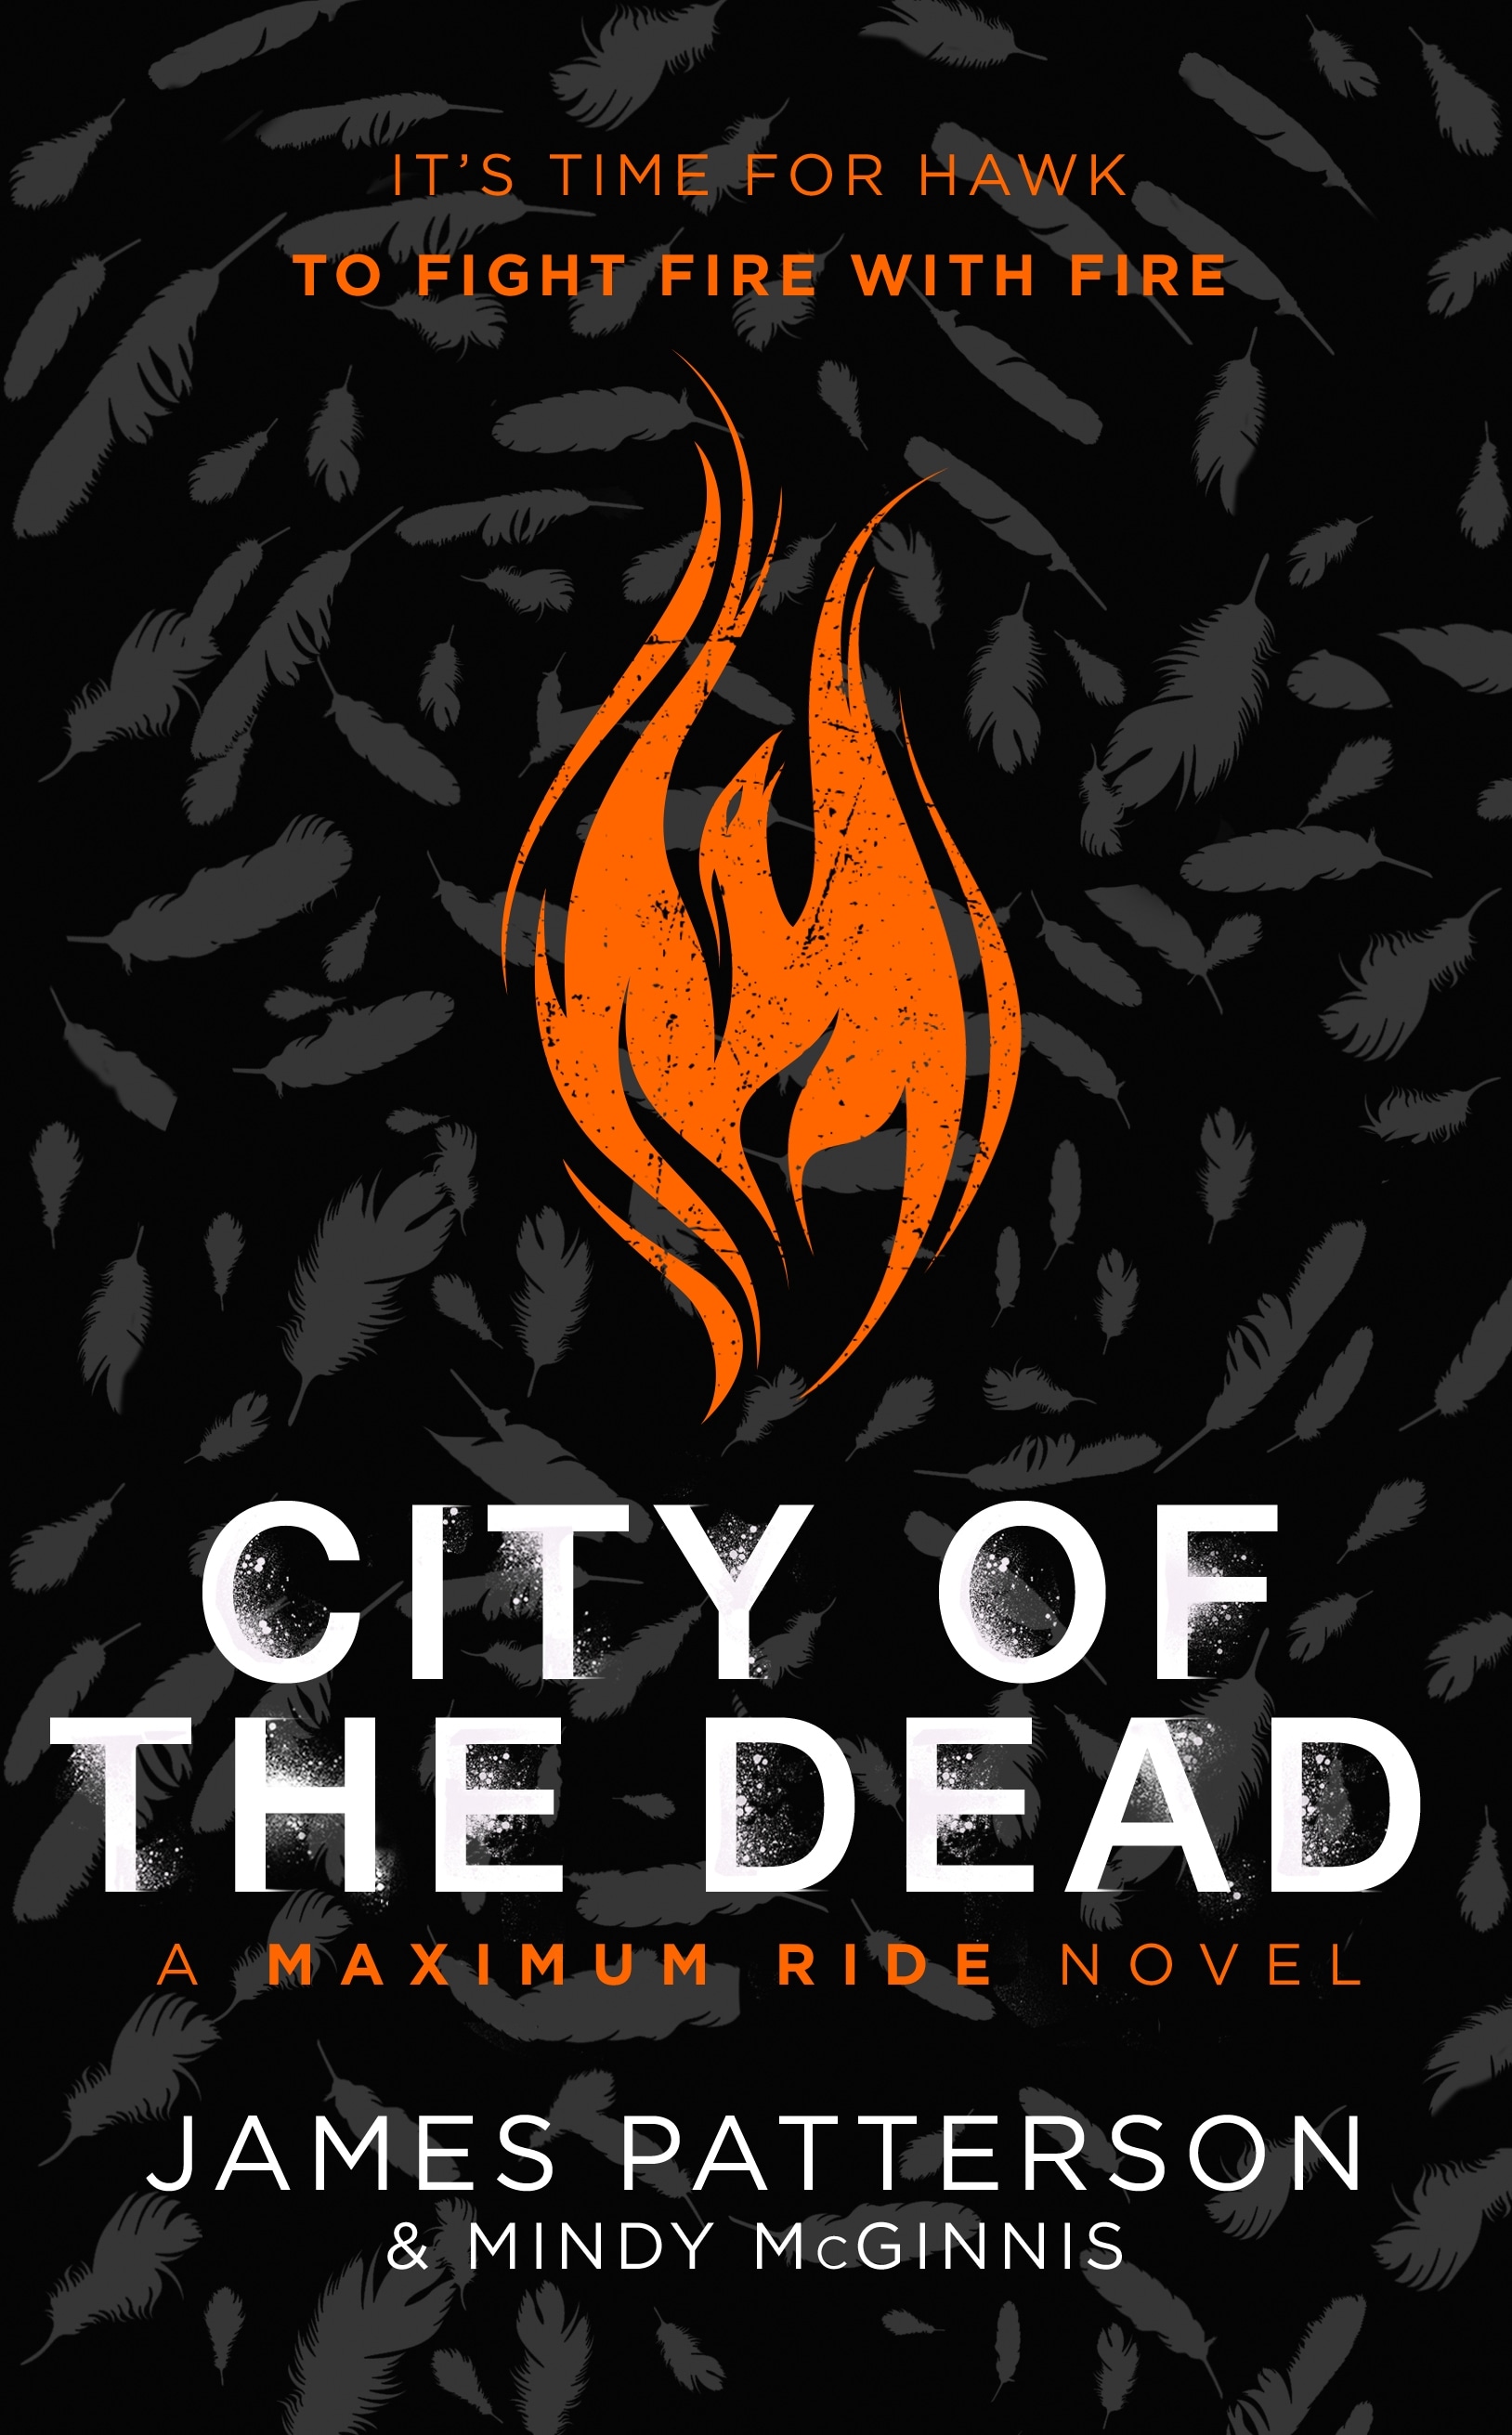 Book “City of the Dead: A Maximum Ride Novel” by James Patterson — November 25, 2021